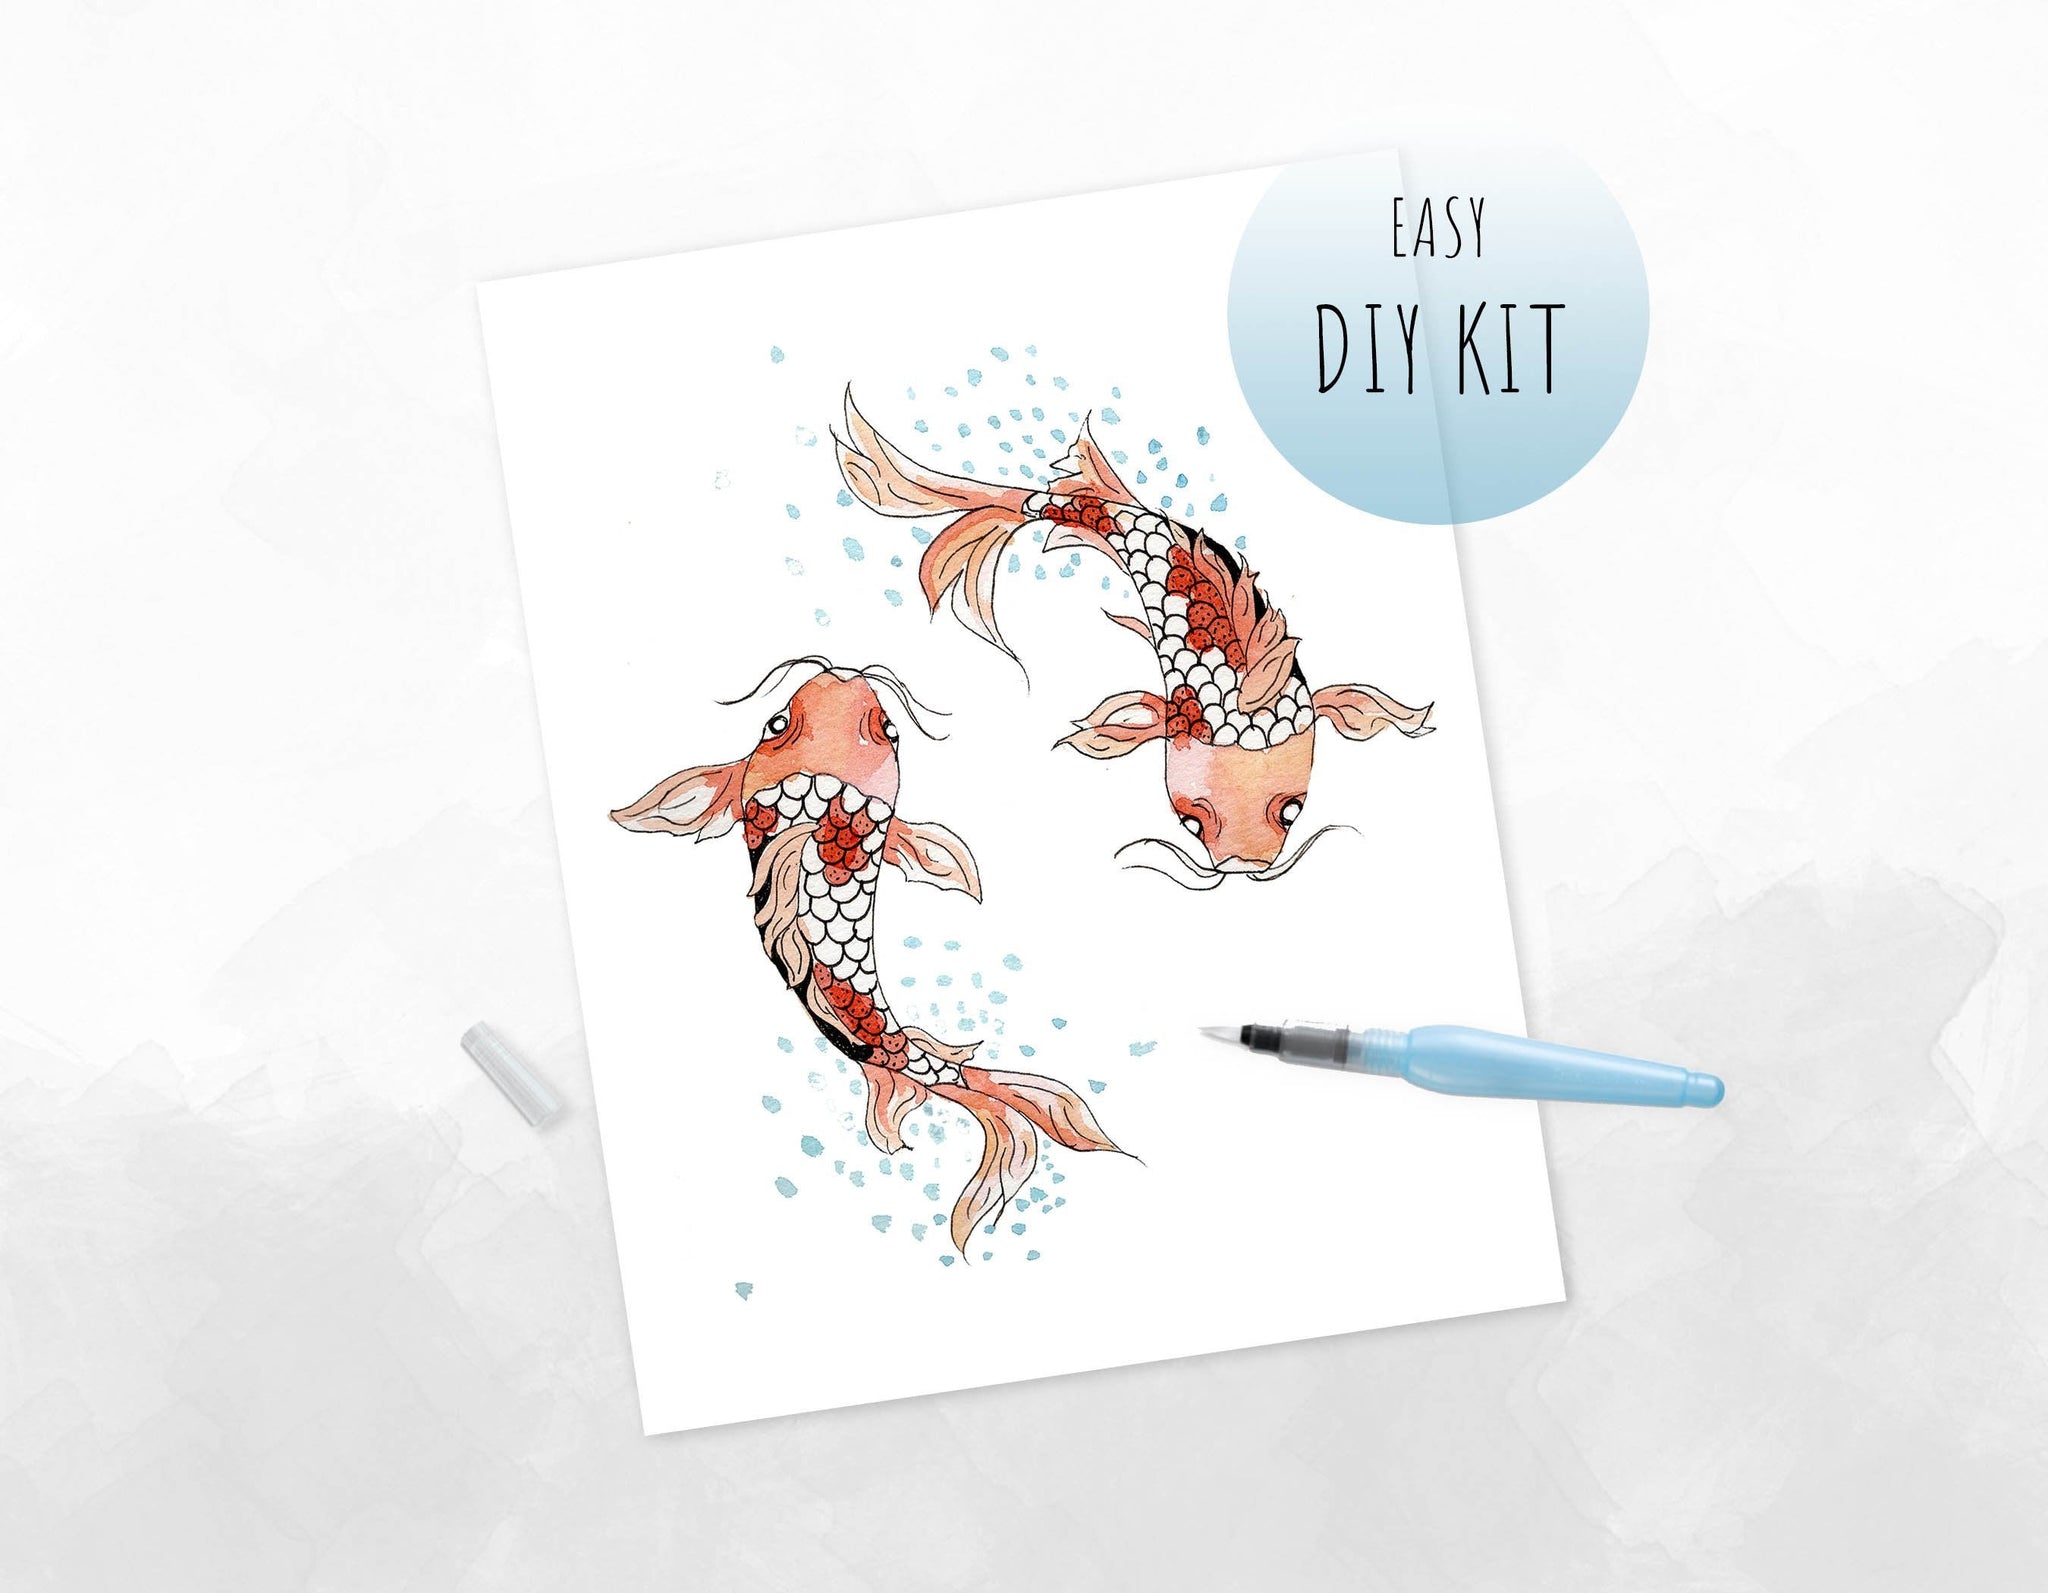 Koi Fish, New illo sketchbook and eraser shavings by coliecreates